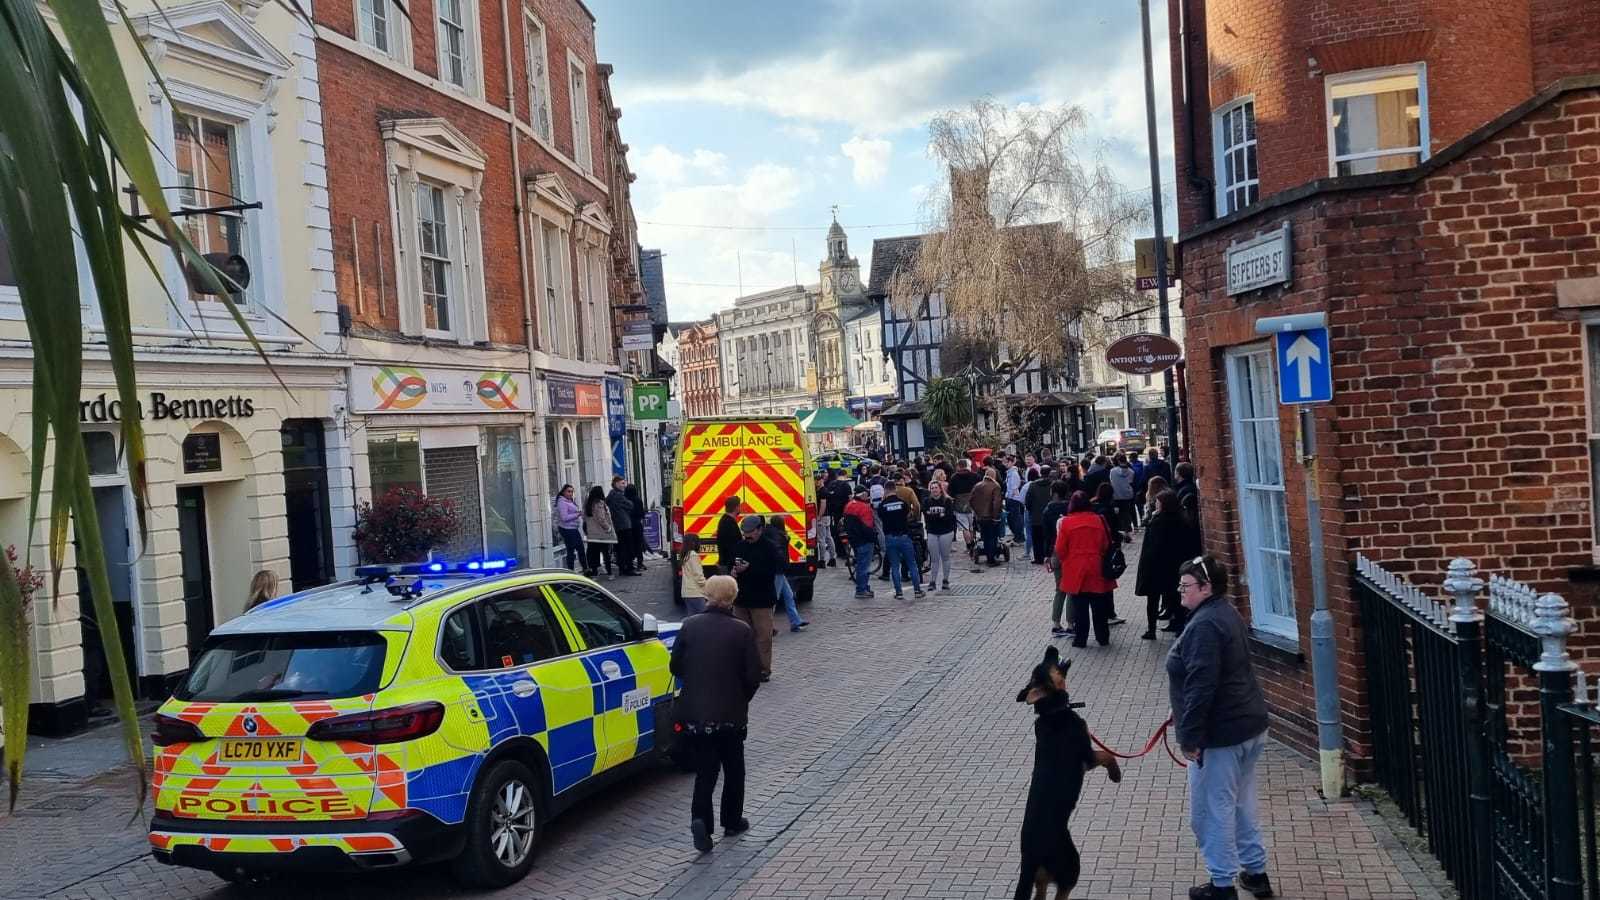 A cordon was put in place in High Town, Hereford. Picture: Paul Rogers